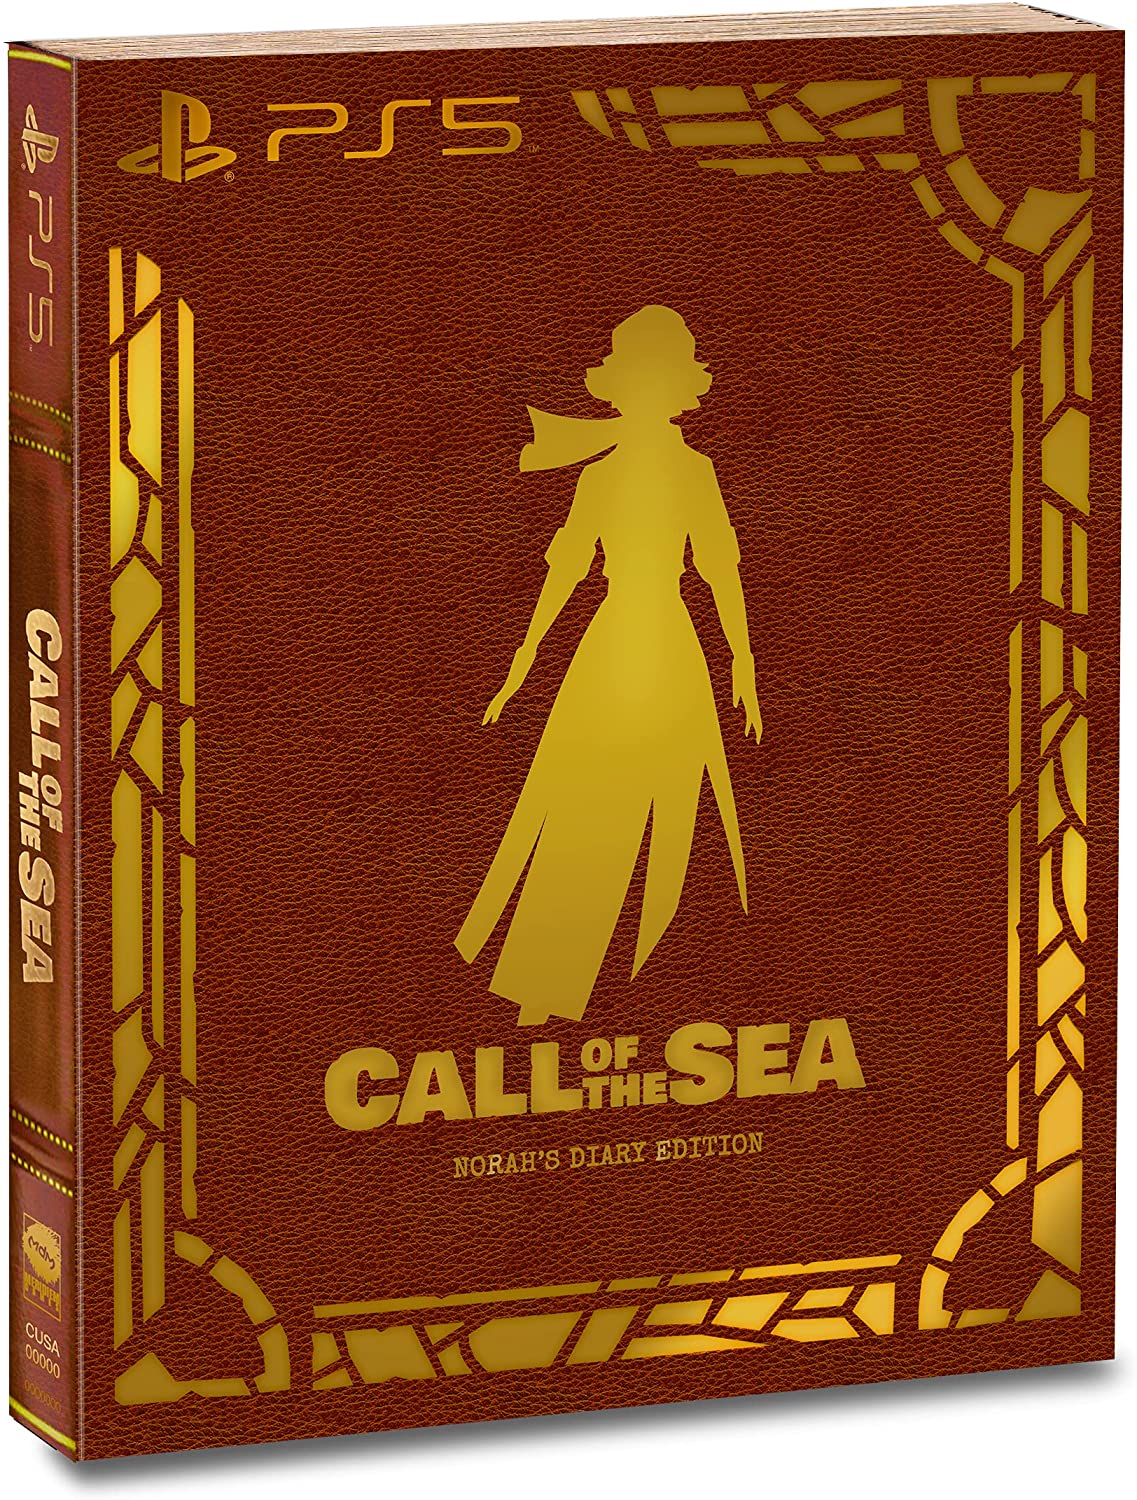 Call of the Sea - Norah's Diary Edition GRA PS5